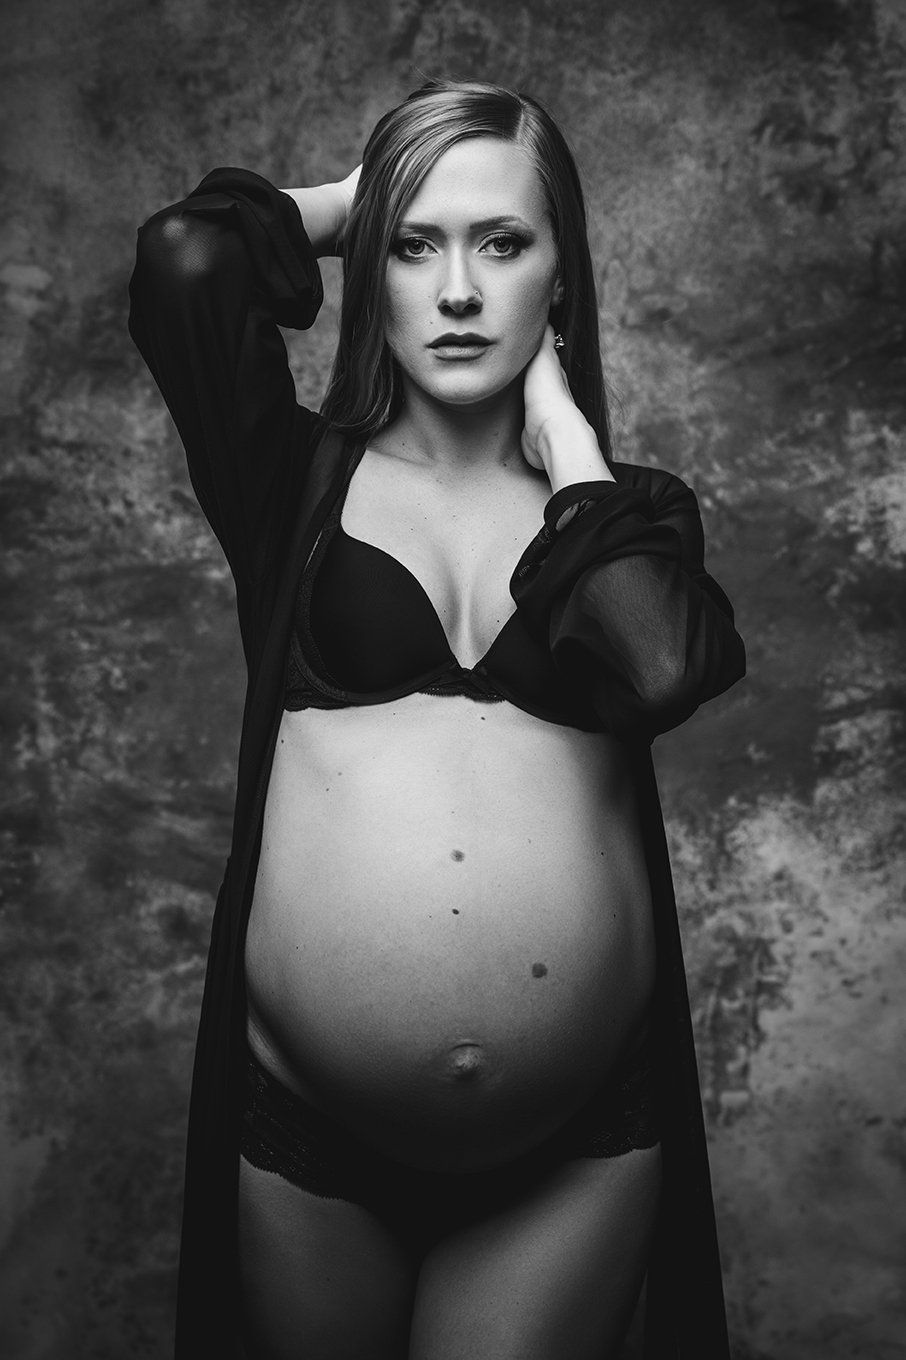 maternity photo of woman standing in front of backdrop, looking into camera with hand on neck